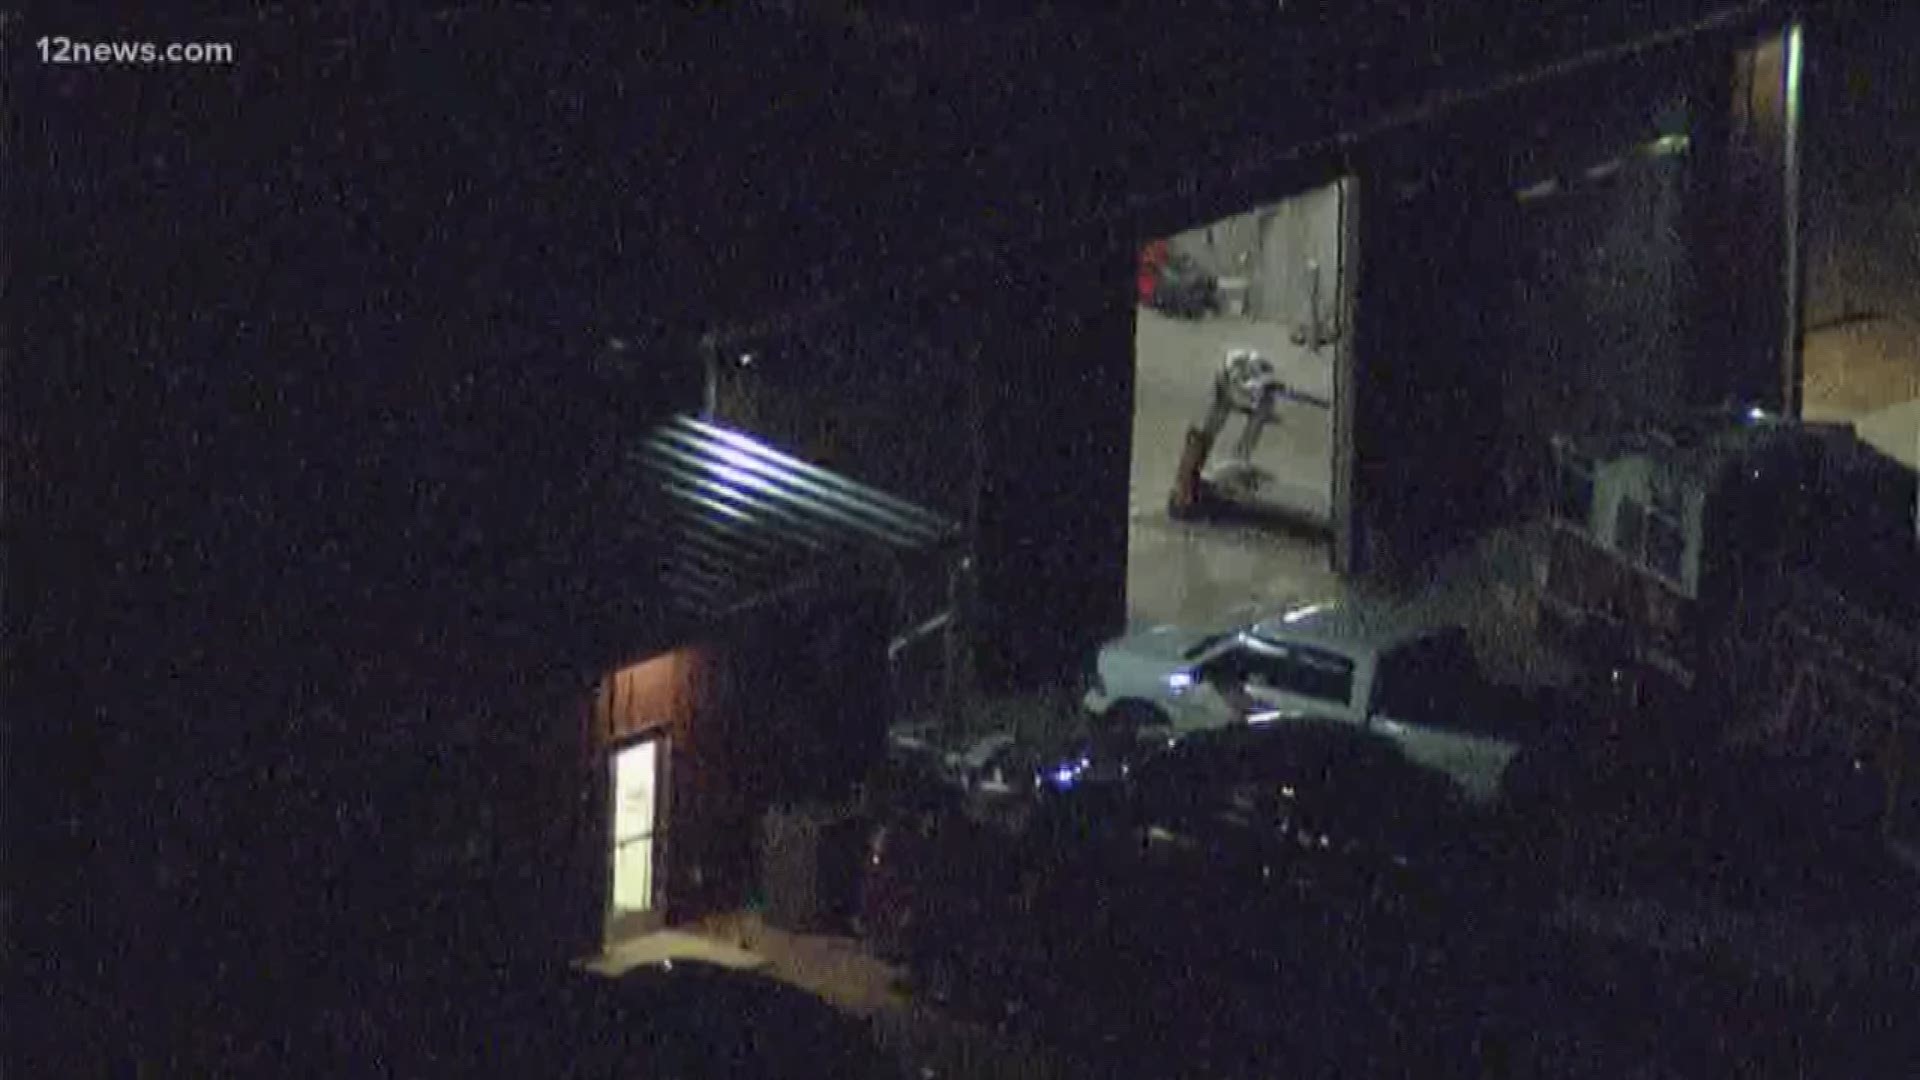 Investigators are looking for two men who ran off after an armed burglary at a fire station Thursday night, according to the Maricopa County Sheriff's Office. Phoenix police initially reported firefighters saw a man breaking into their fire engine in the fenced station yard near Dobbins Road and 43rd Avenue.